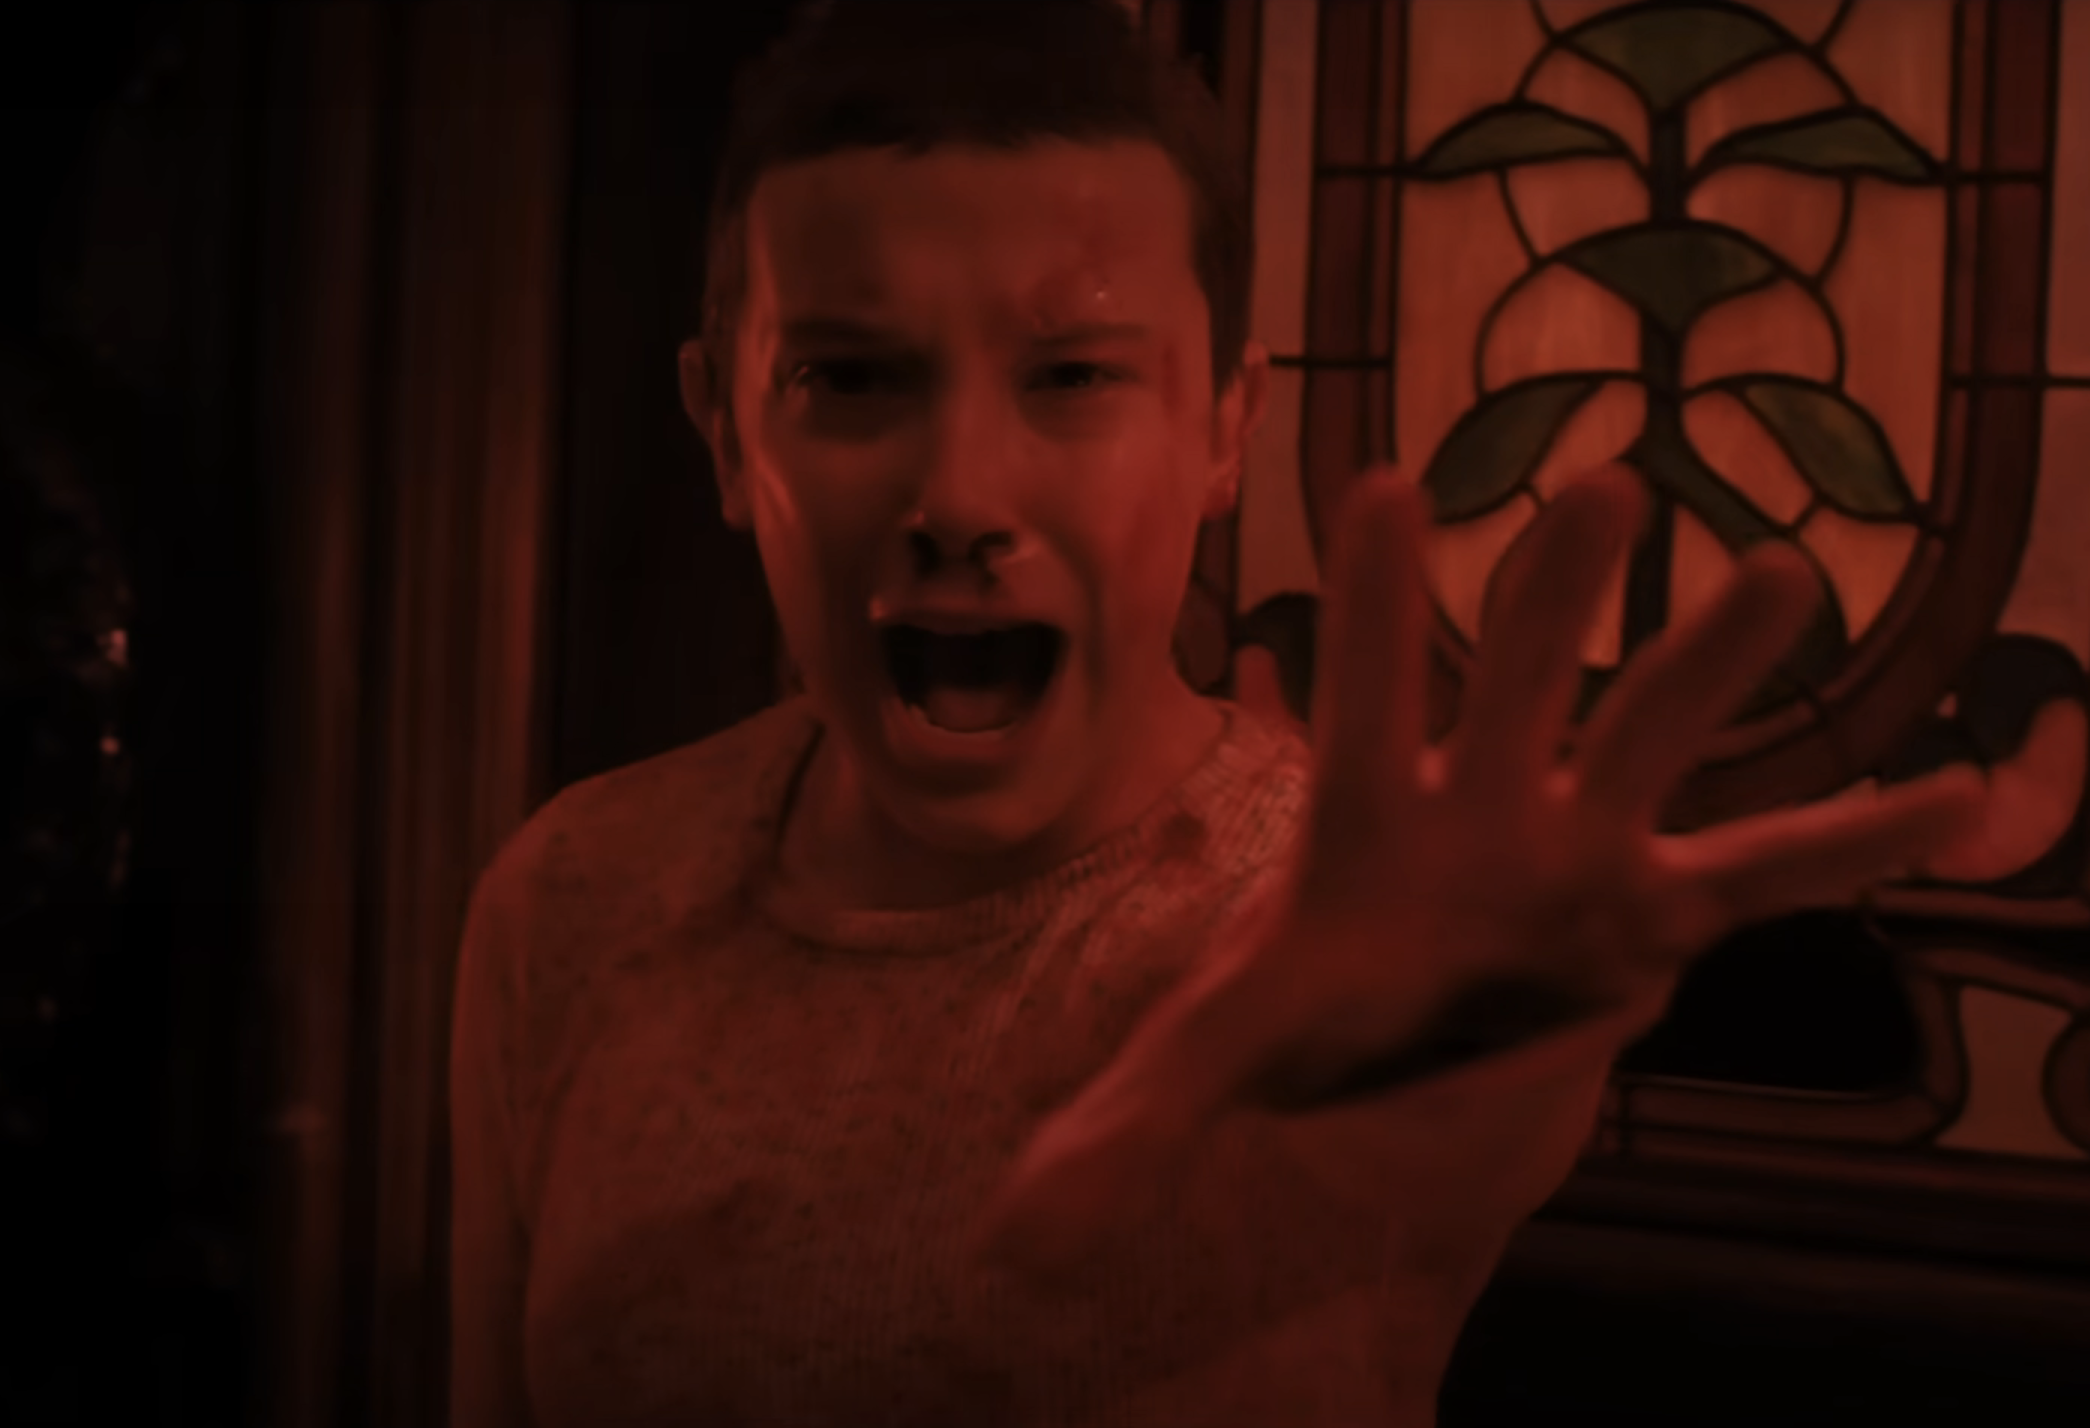 Millie Bobby Brown as Eleven in Stranger Things screaming with her hand outstretched